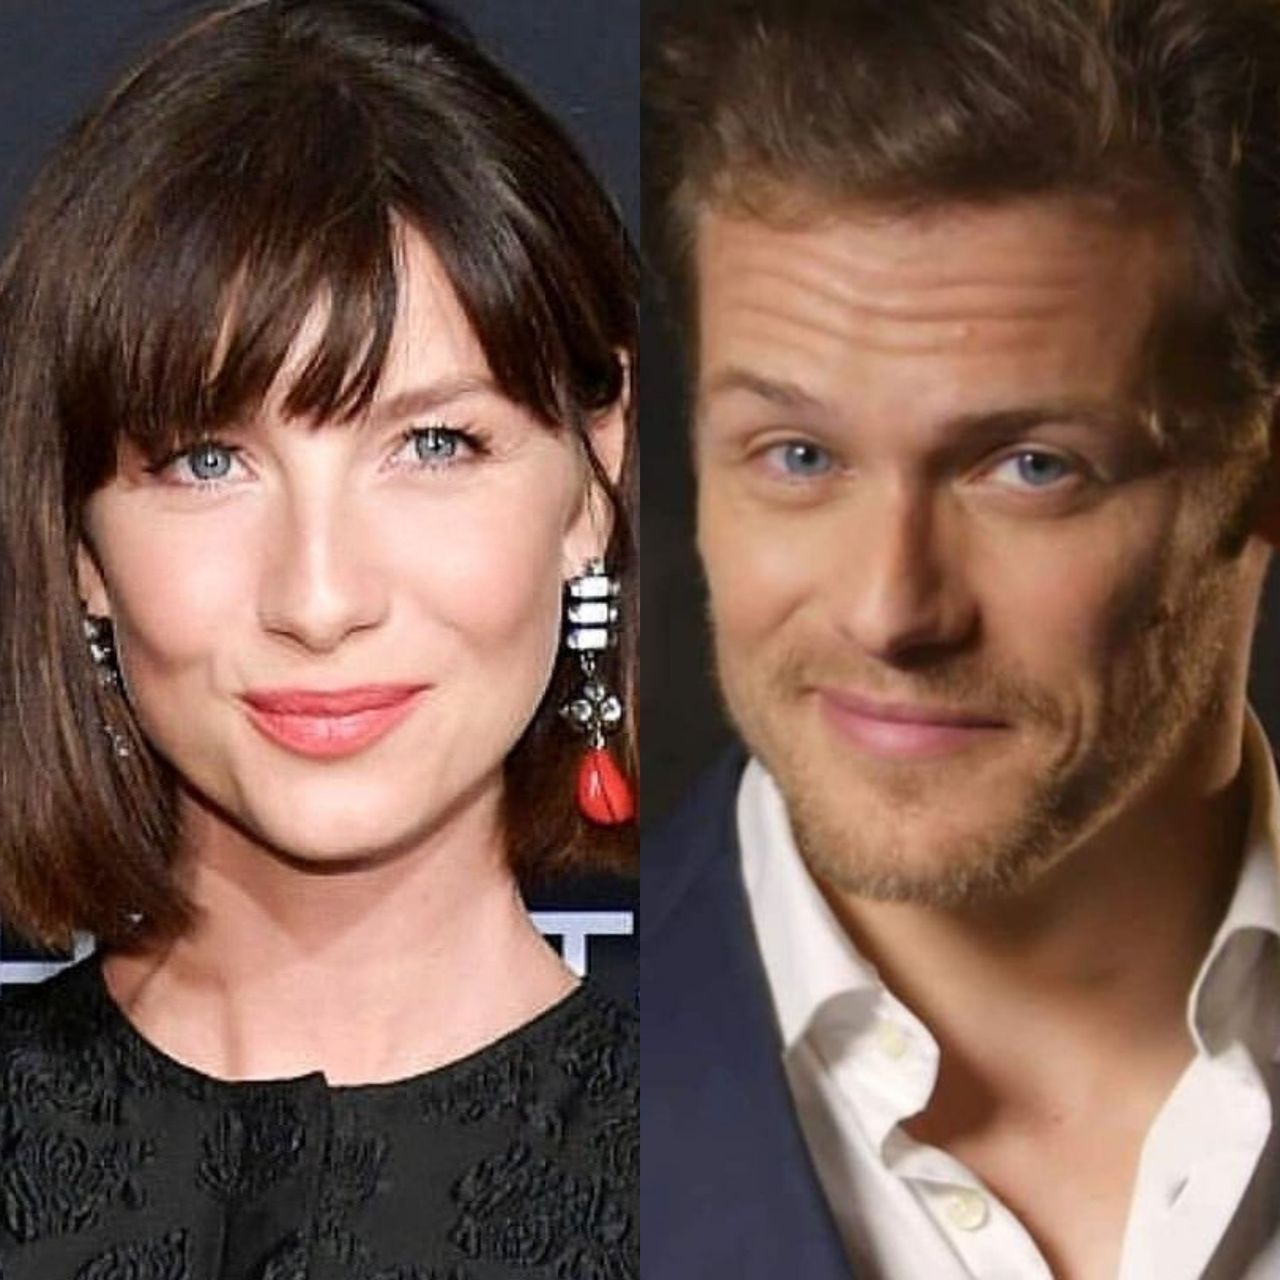 Sam and cait not dating